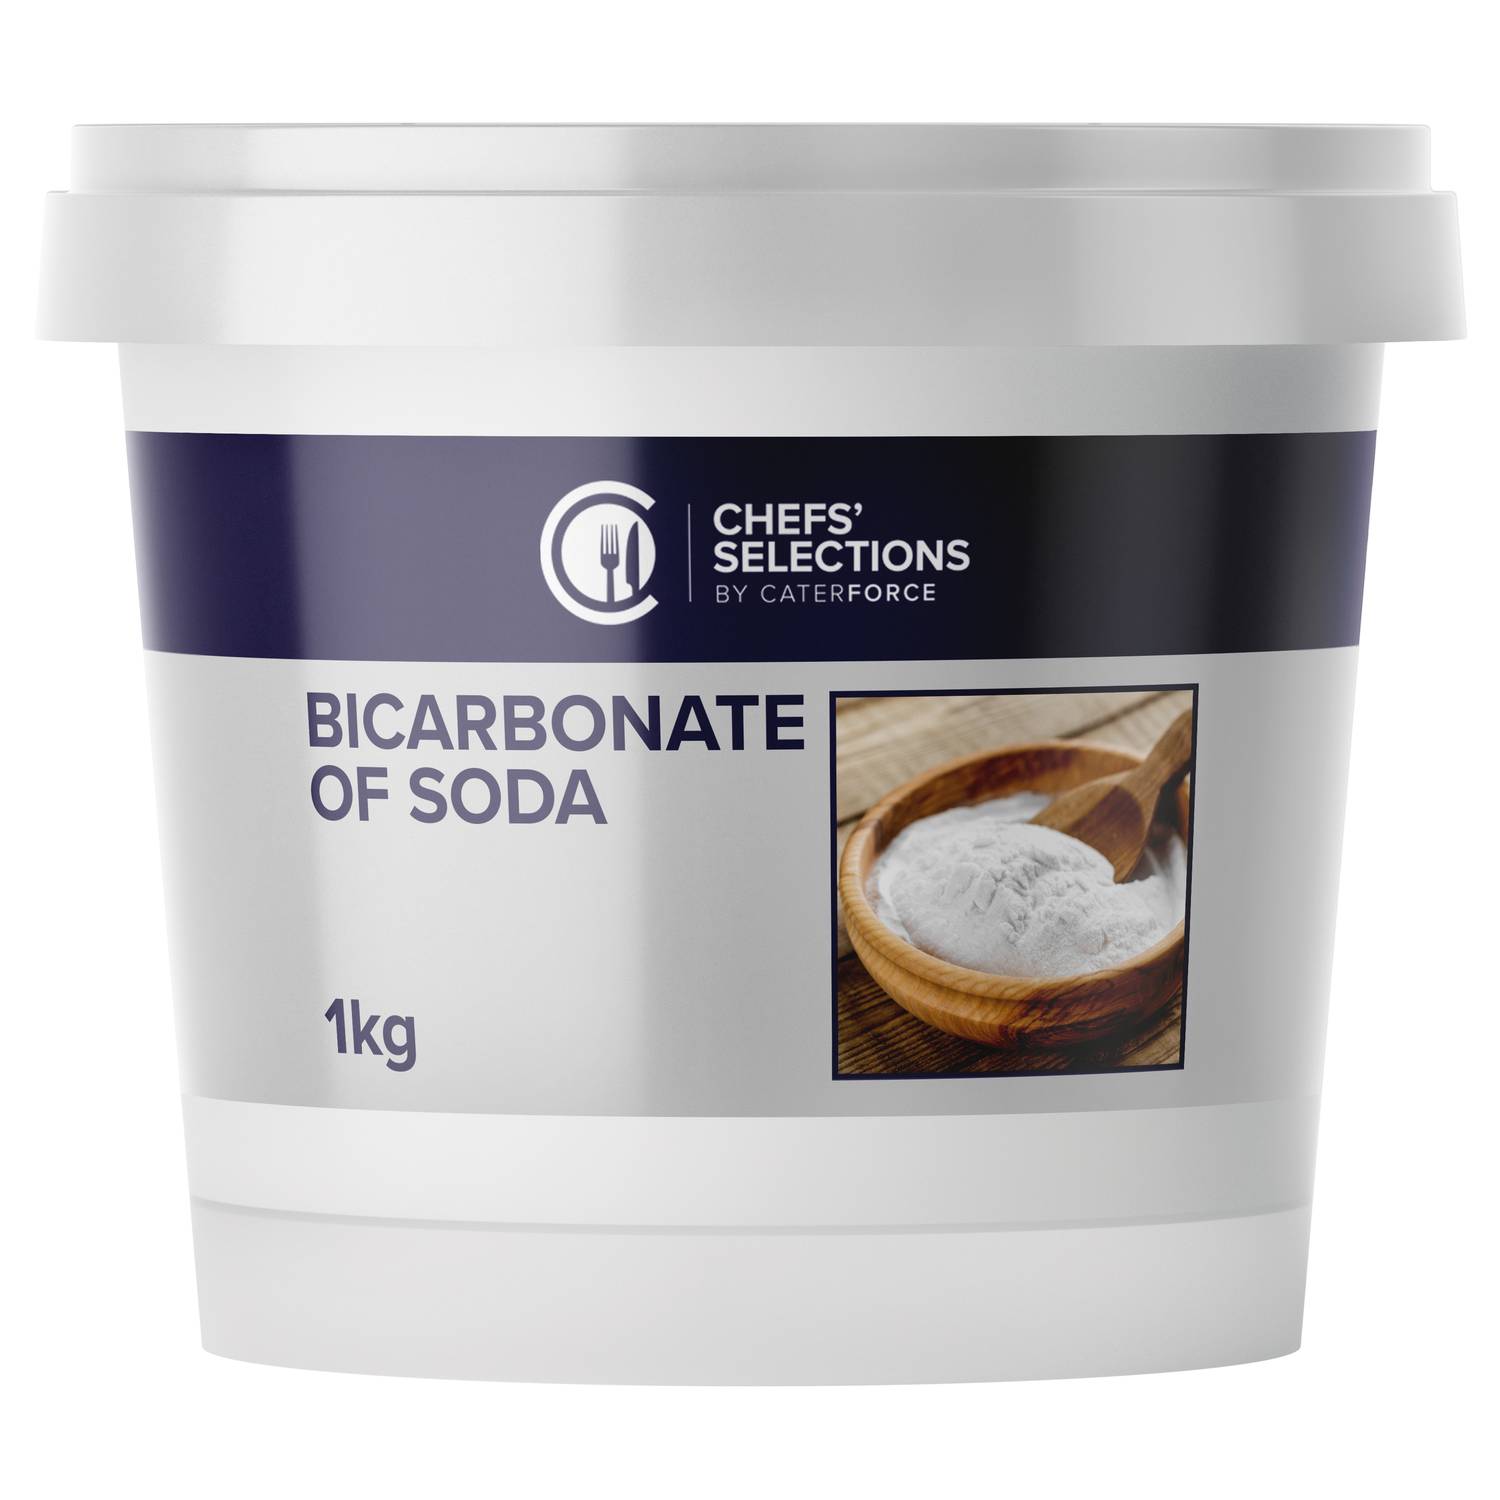 Chefs’ Selections Bicarbonate Of Soda (6 x 1000g)